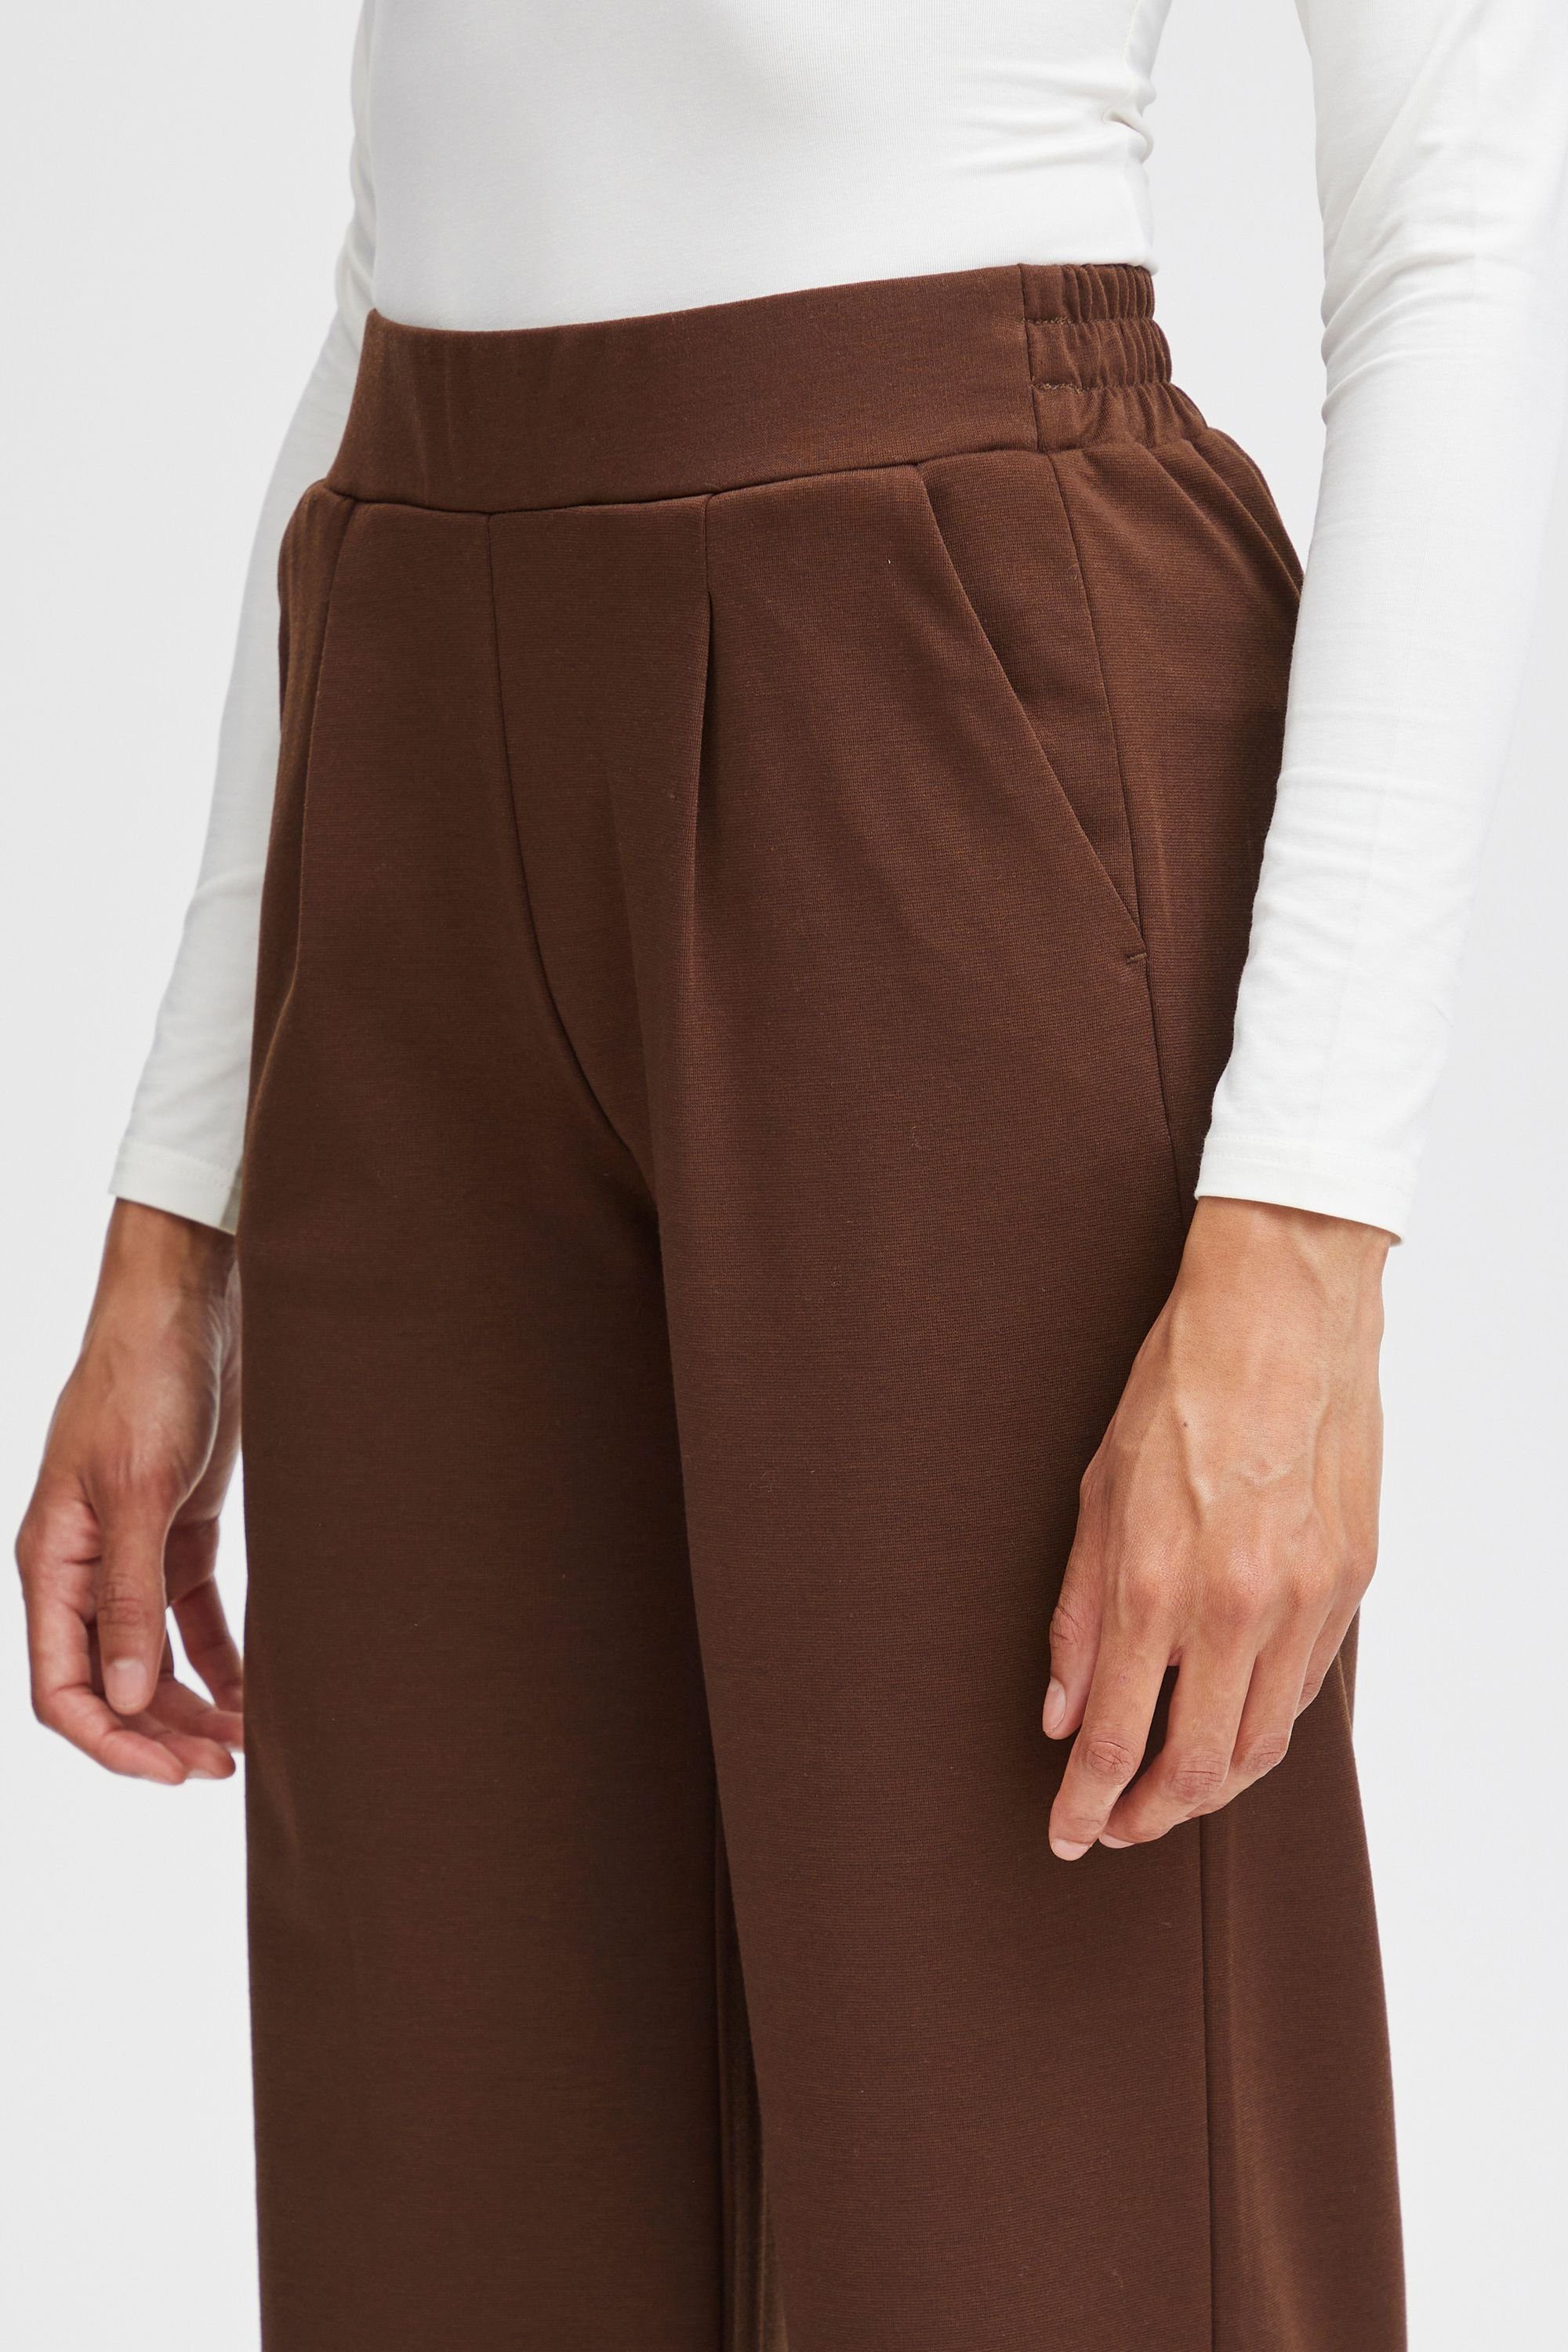 b.young Stoffhose BYRIZETTA 2 20812847 Coffee - (191419) 2 WIDE Chicory PANTS